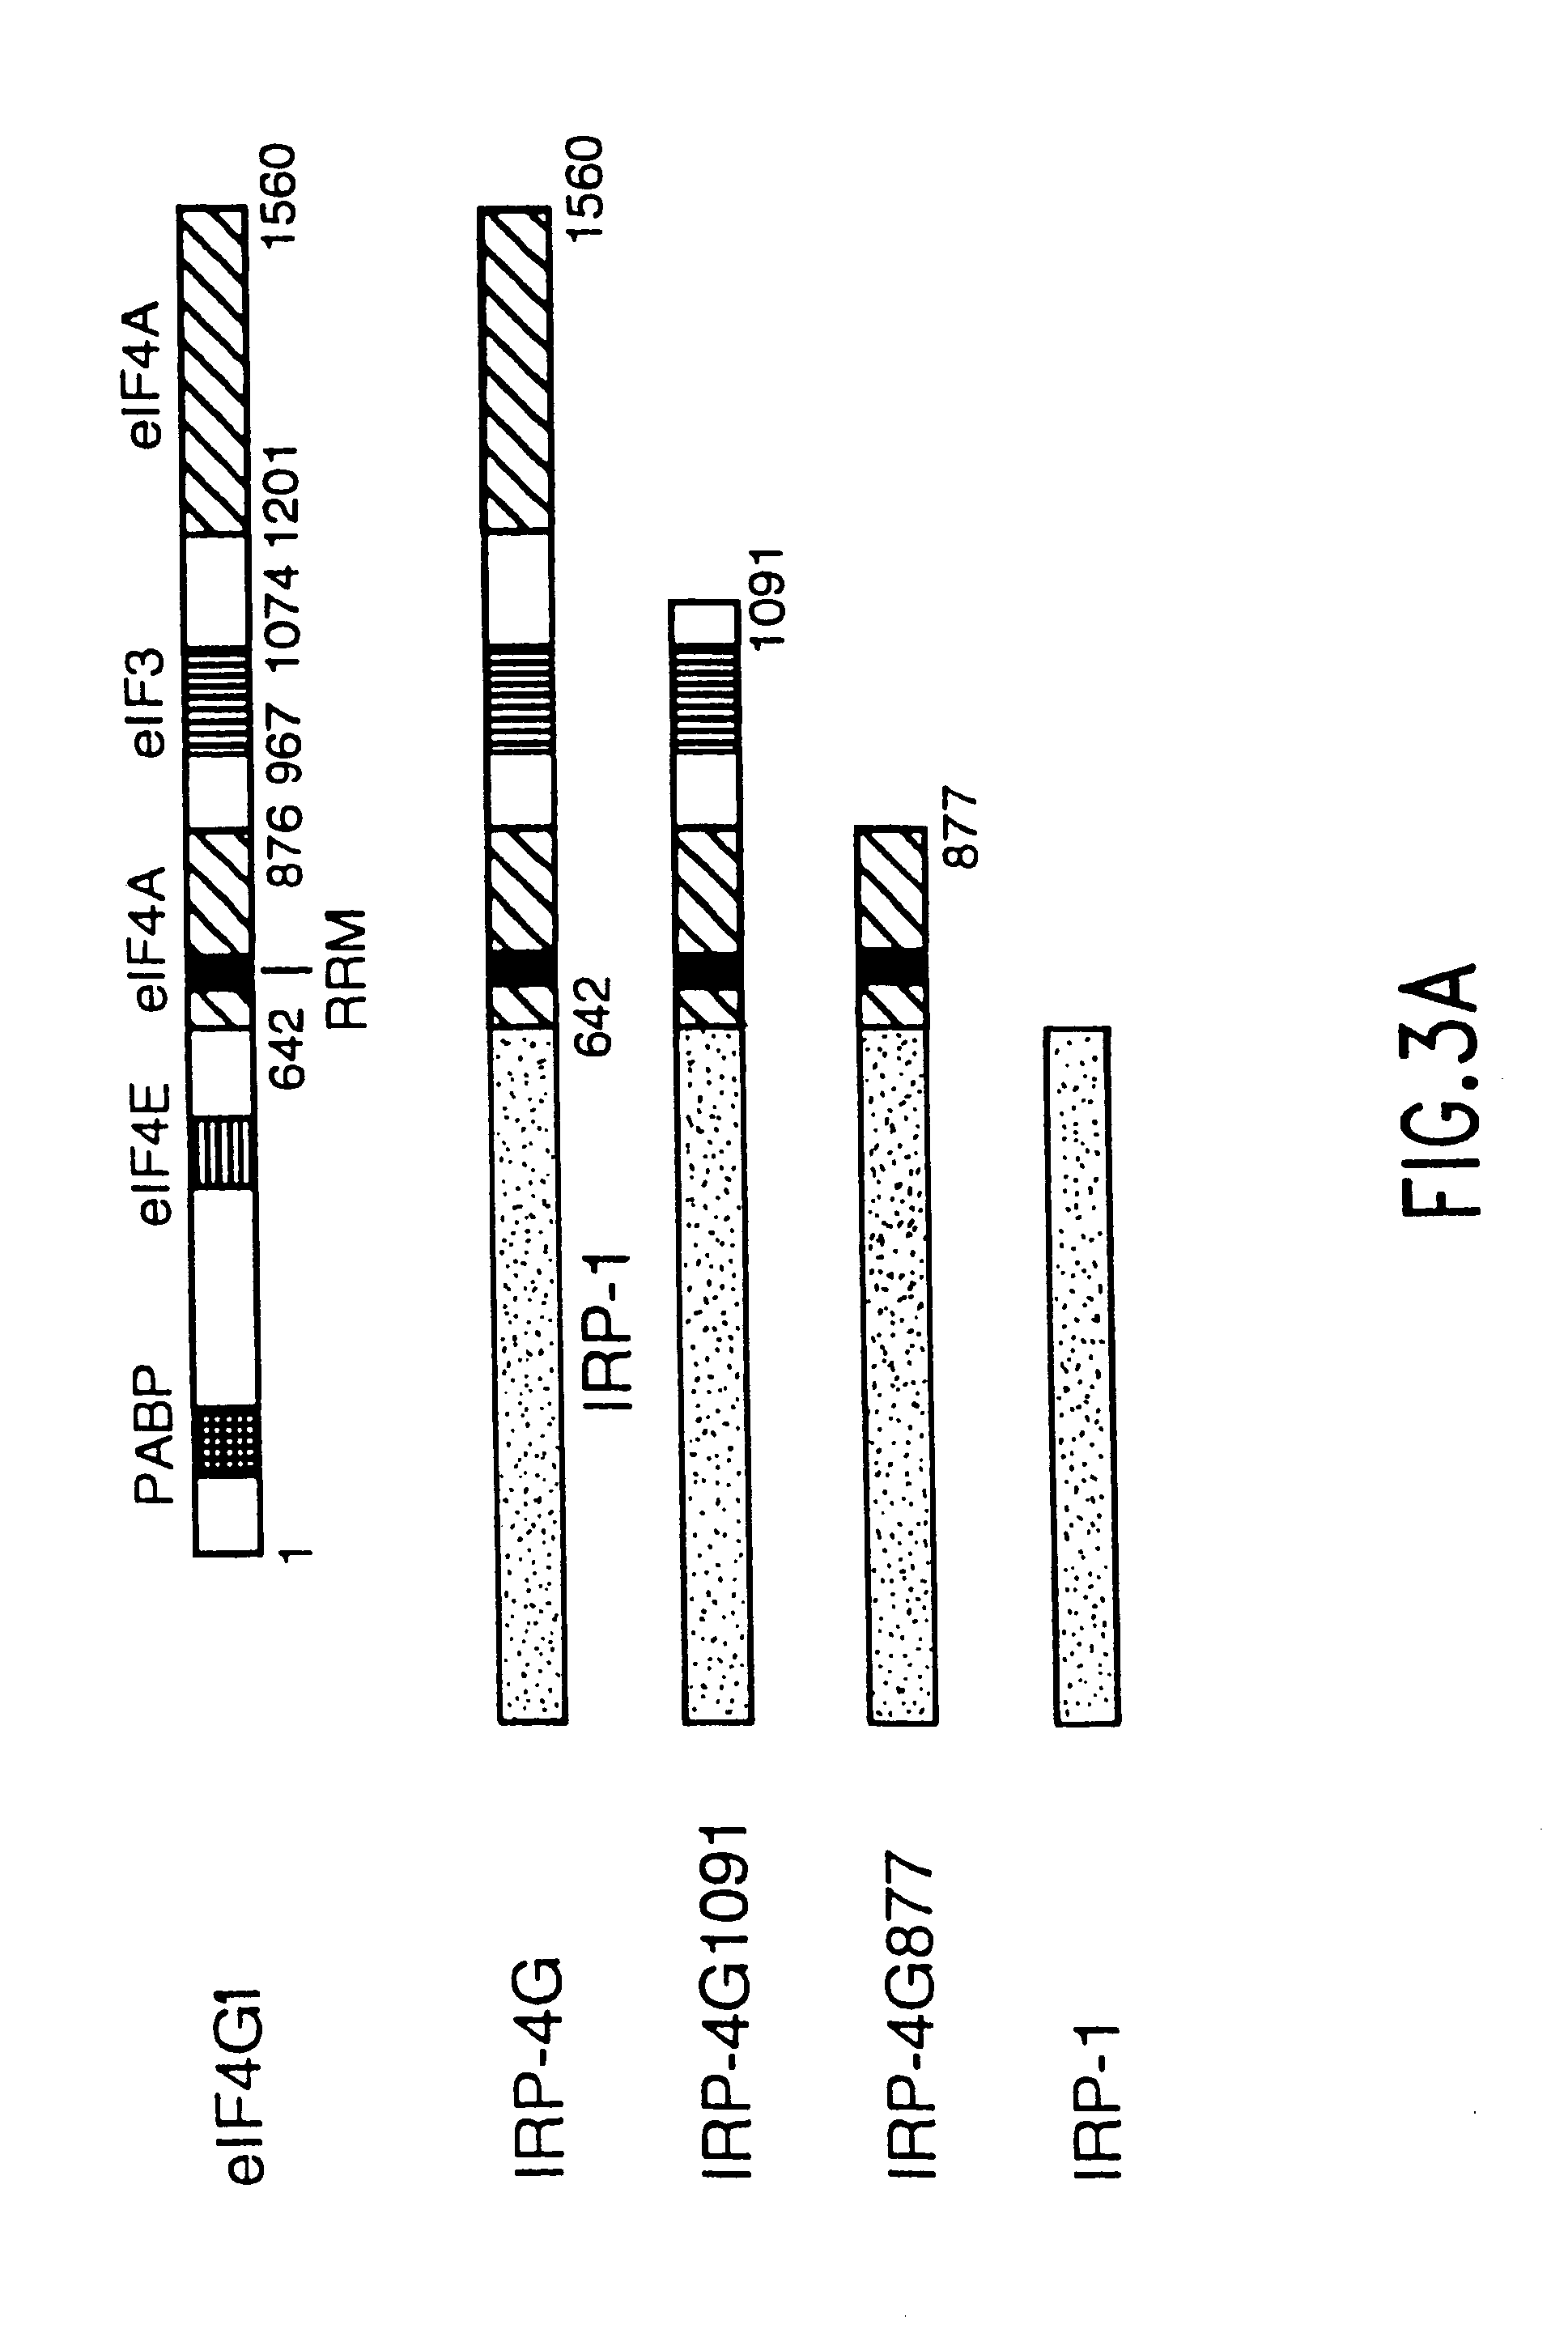 Translation driver system and methods for use thereof